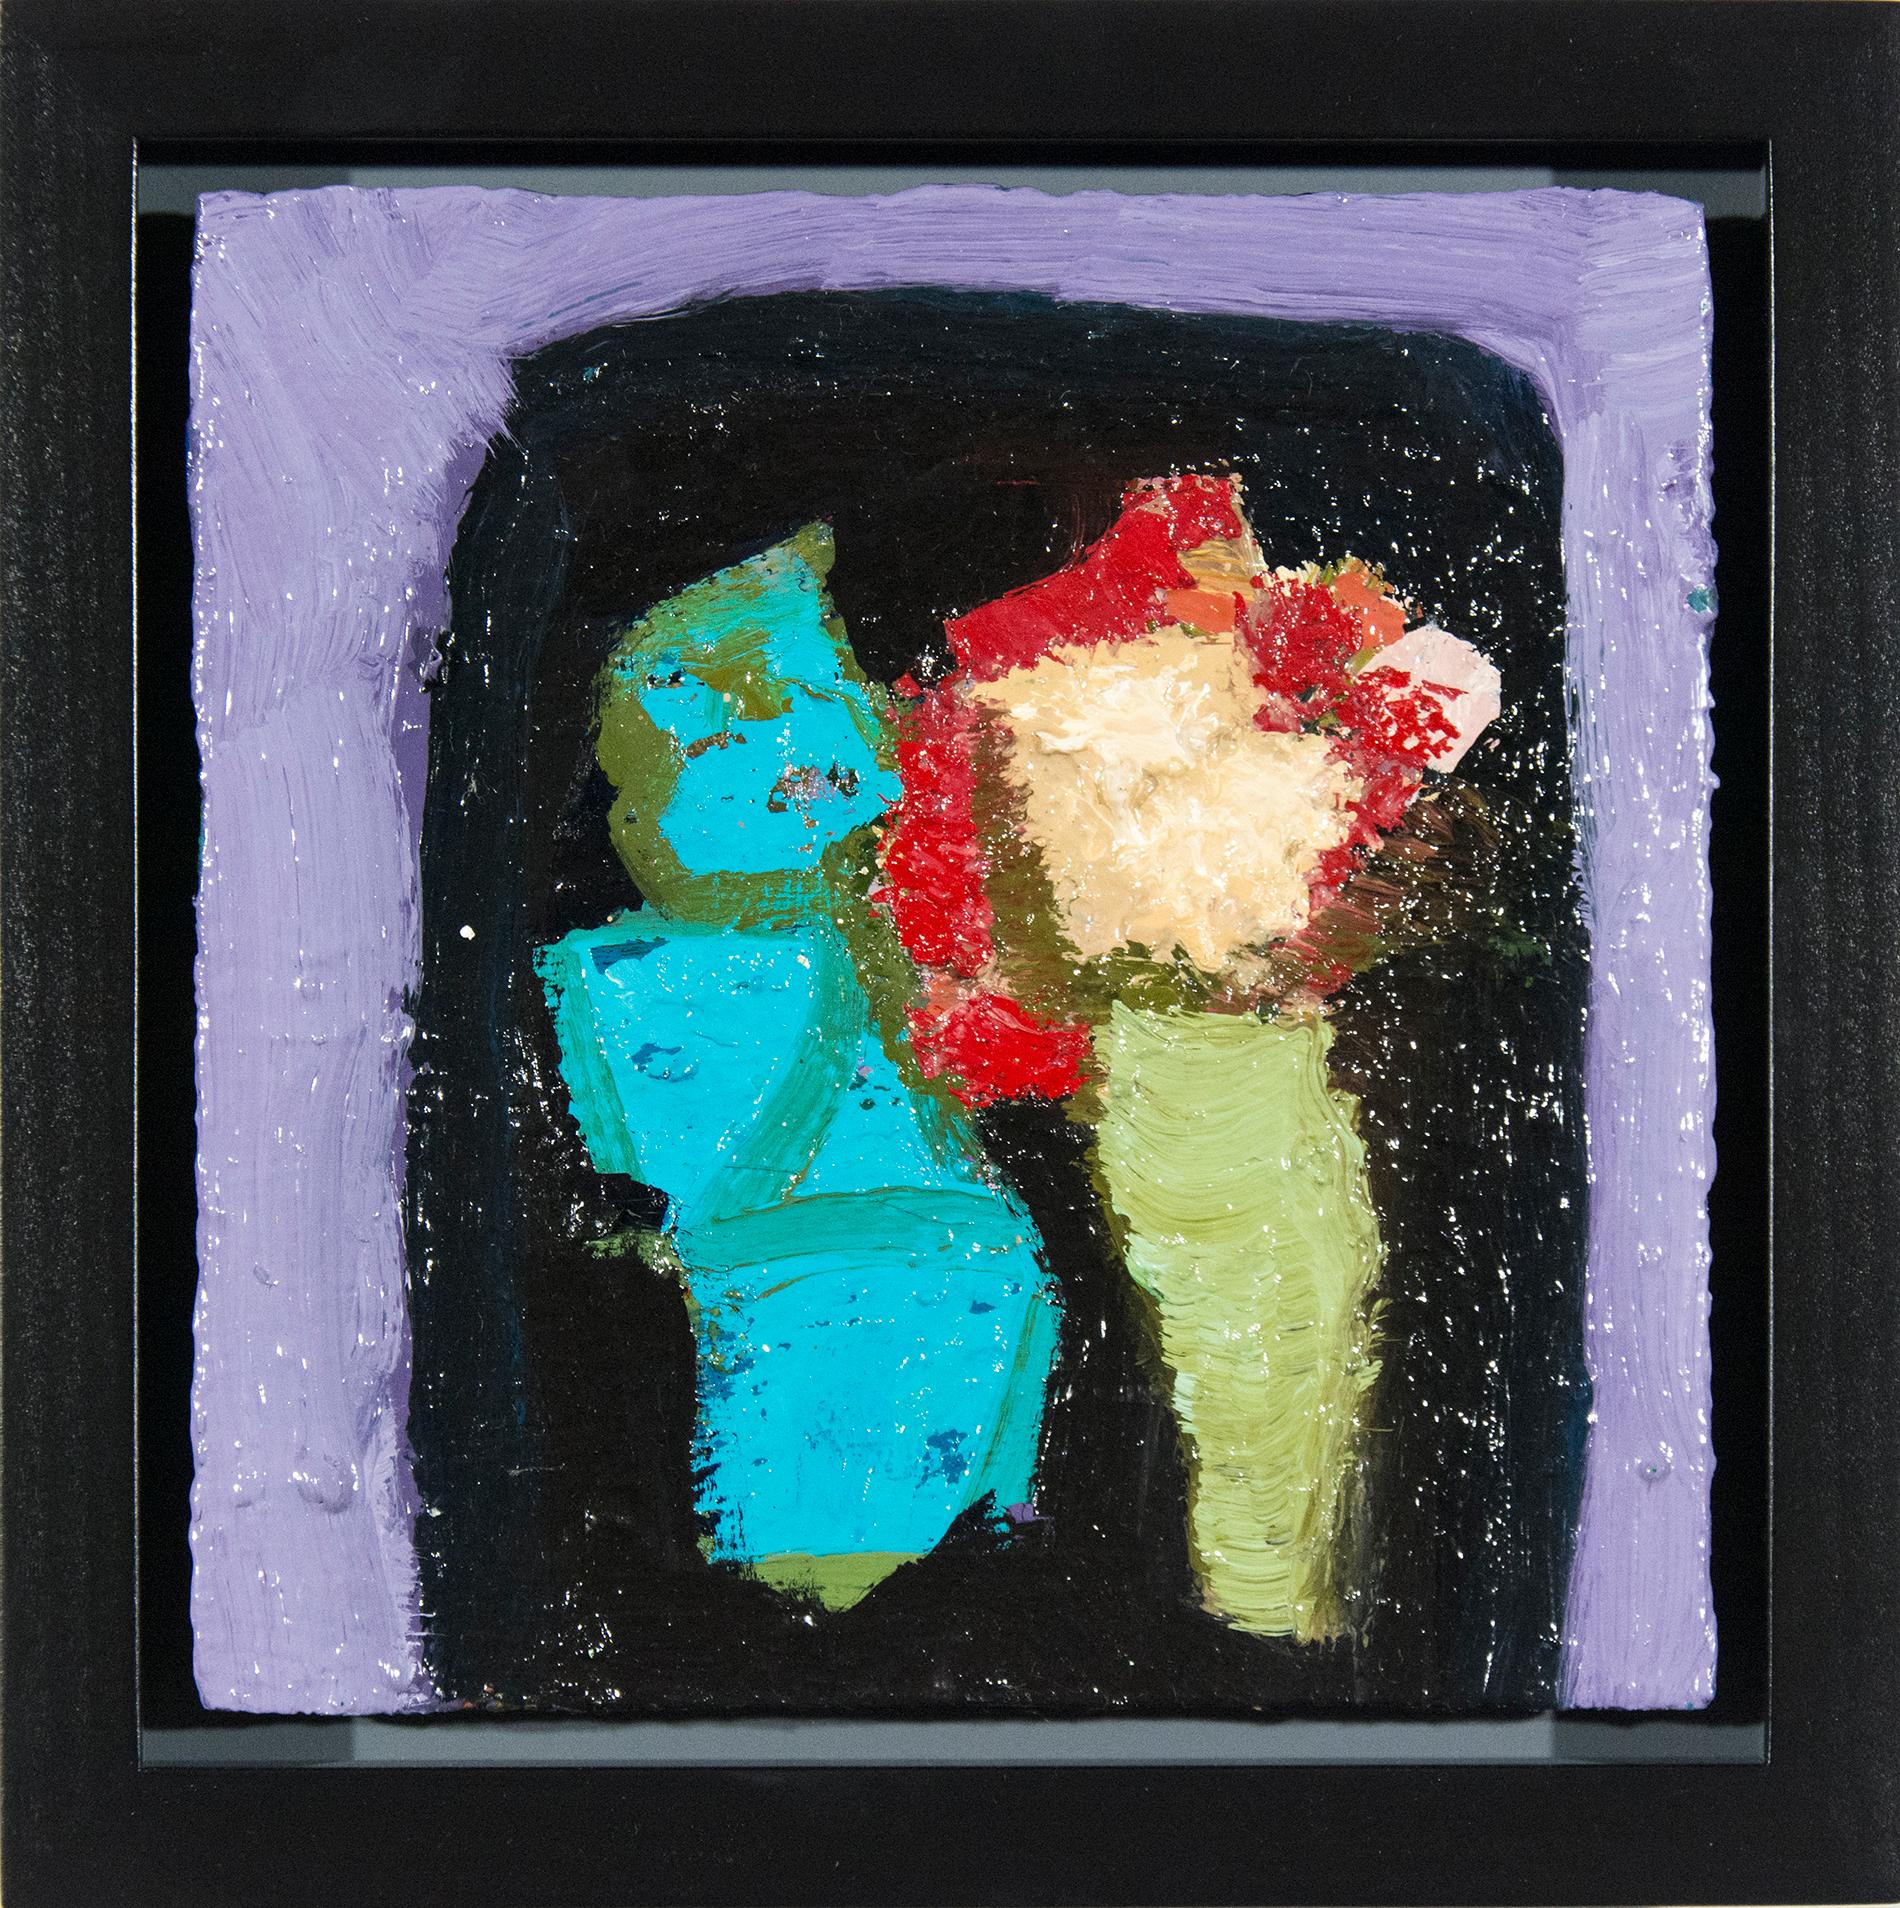 Turquoise with Red Petals - small, bright, floral, purple, blue, still life oil